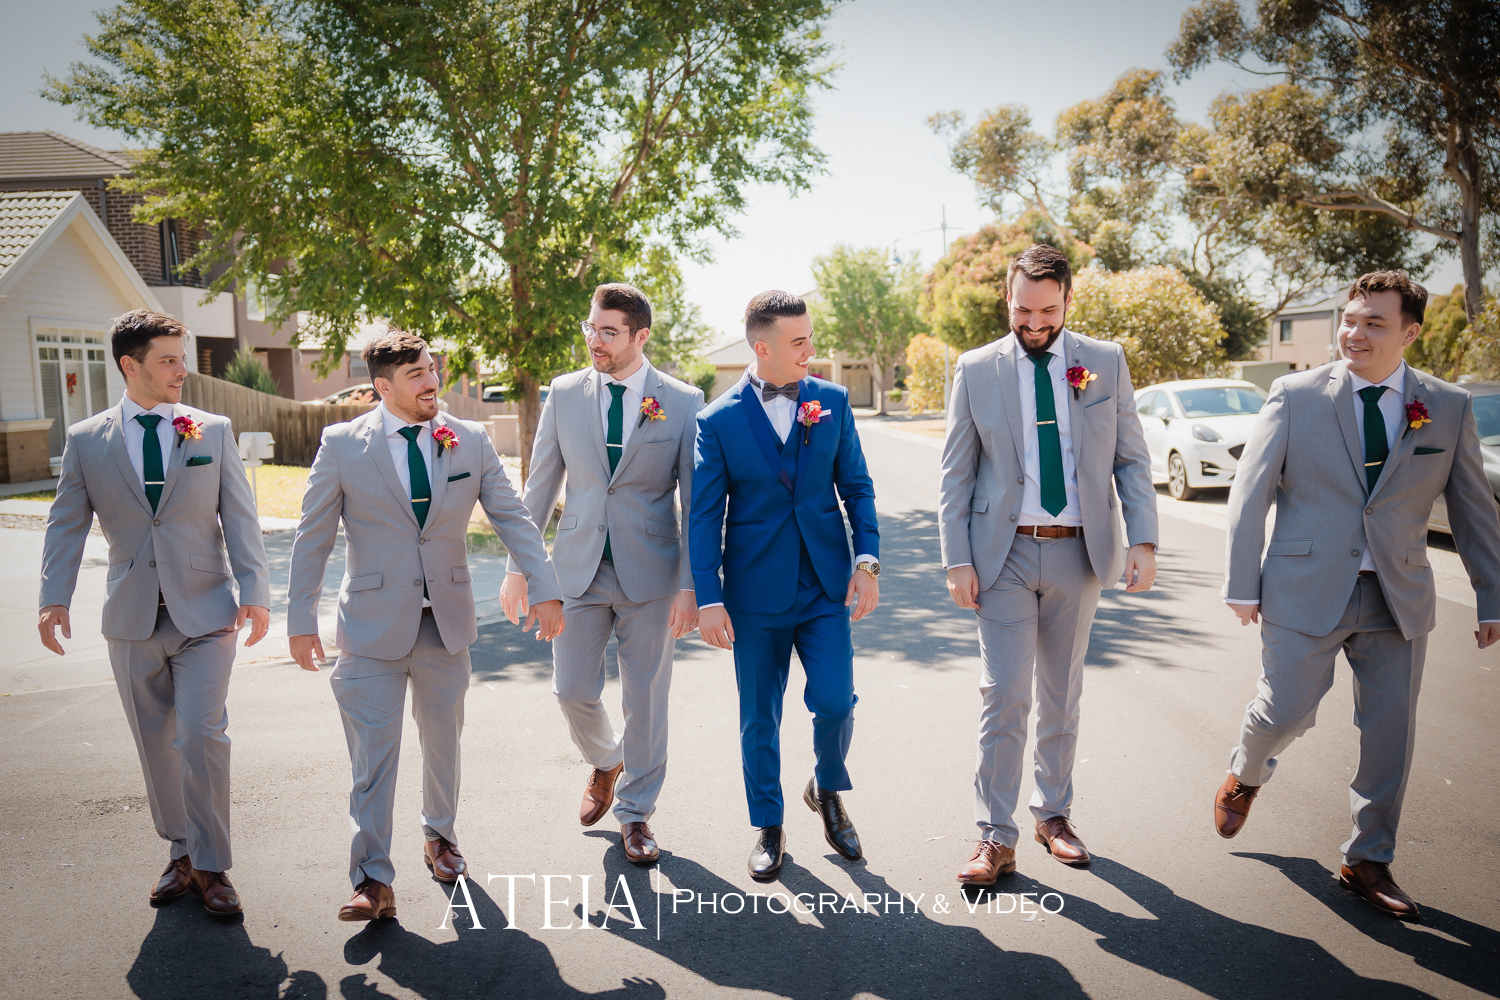 , Jenny and Alexandros&#8217; wedding photography at Sheldon Receptions captured by ATEIA Photography &#038; Video